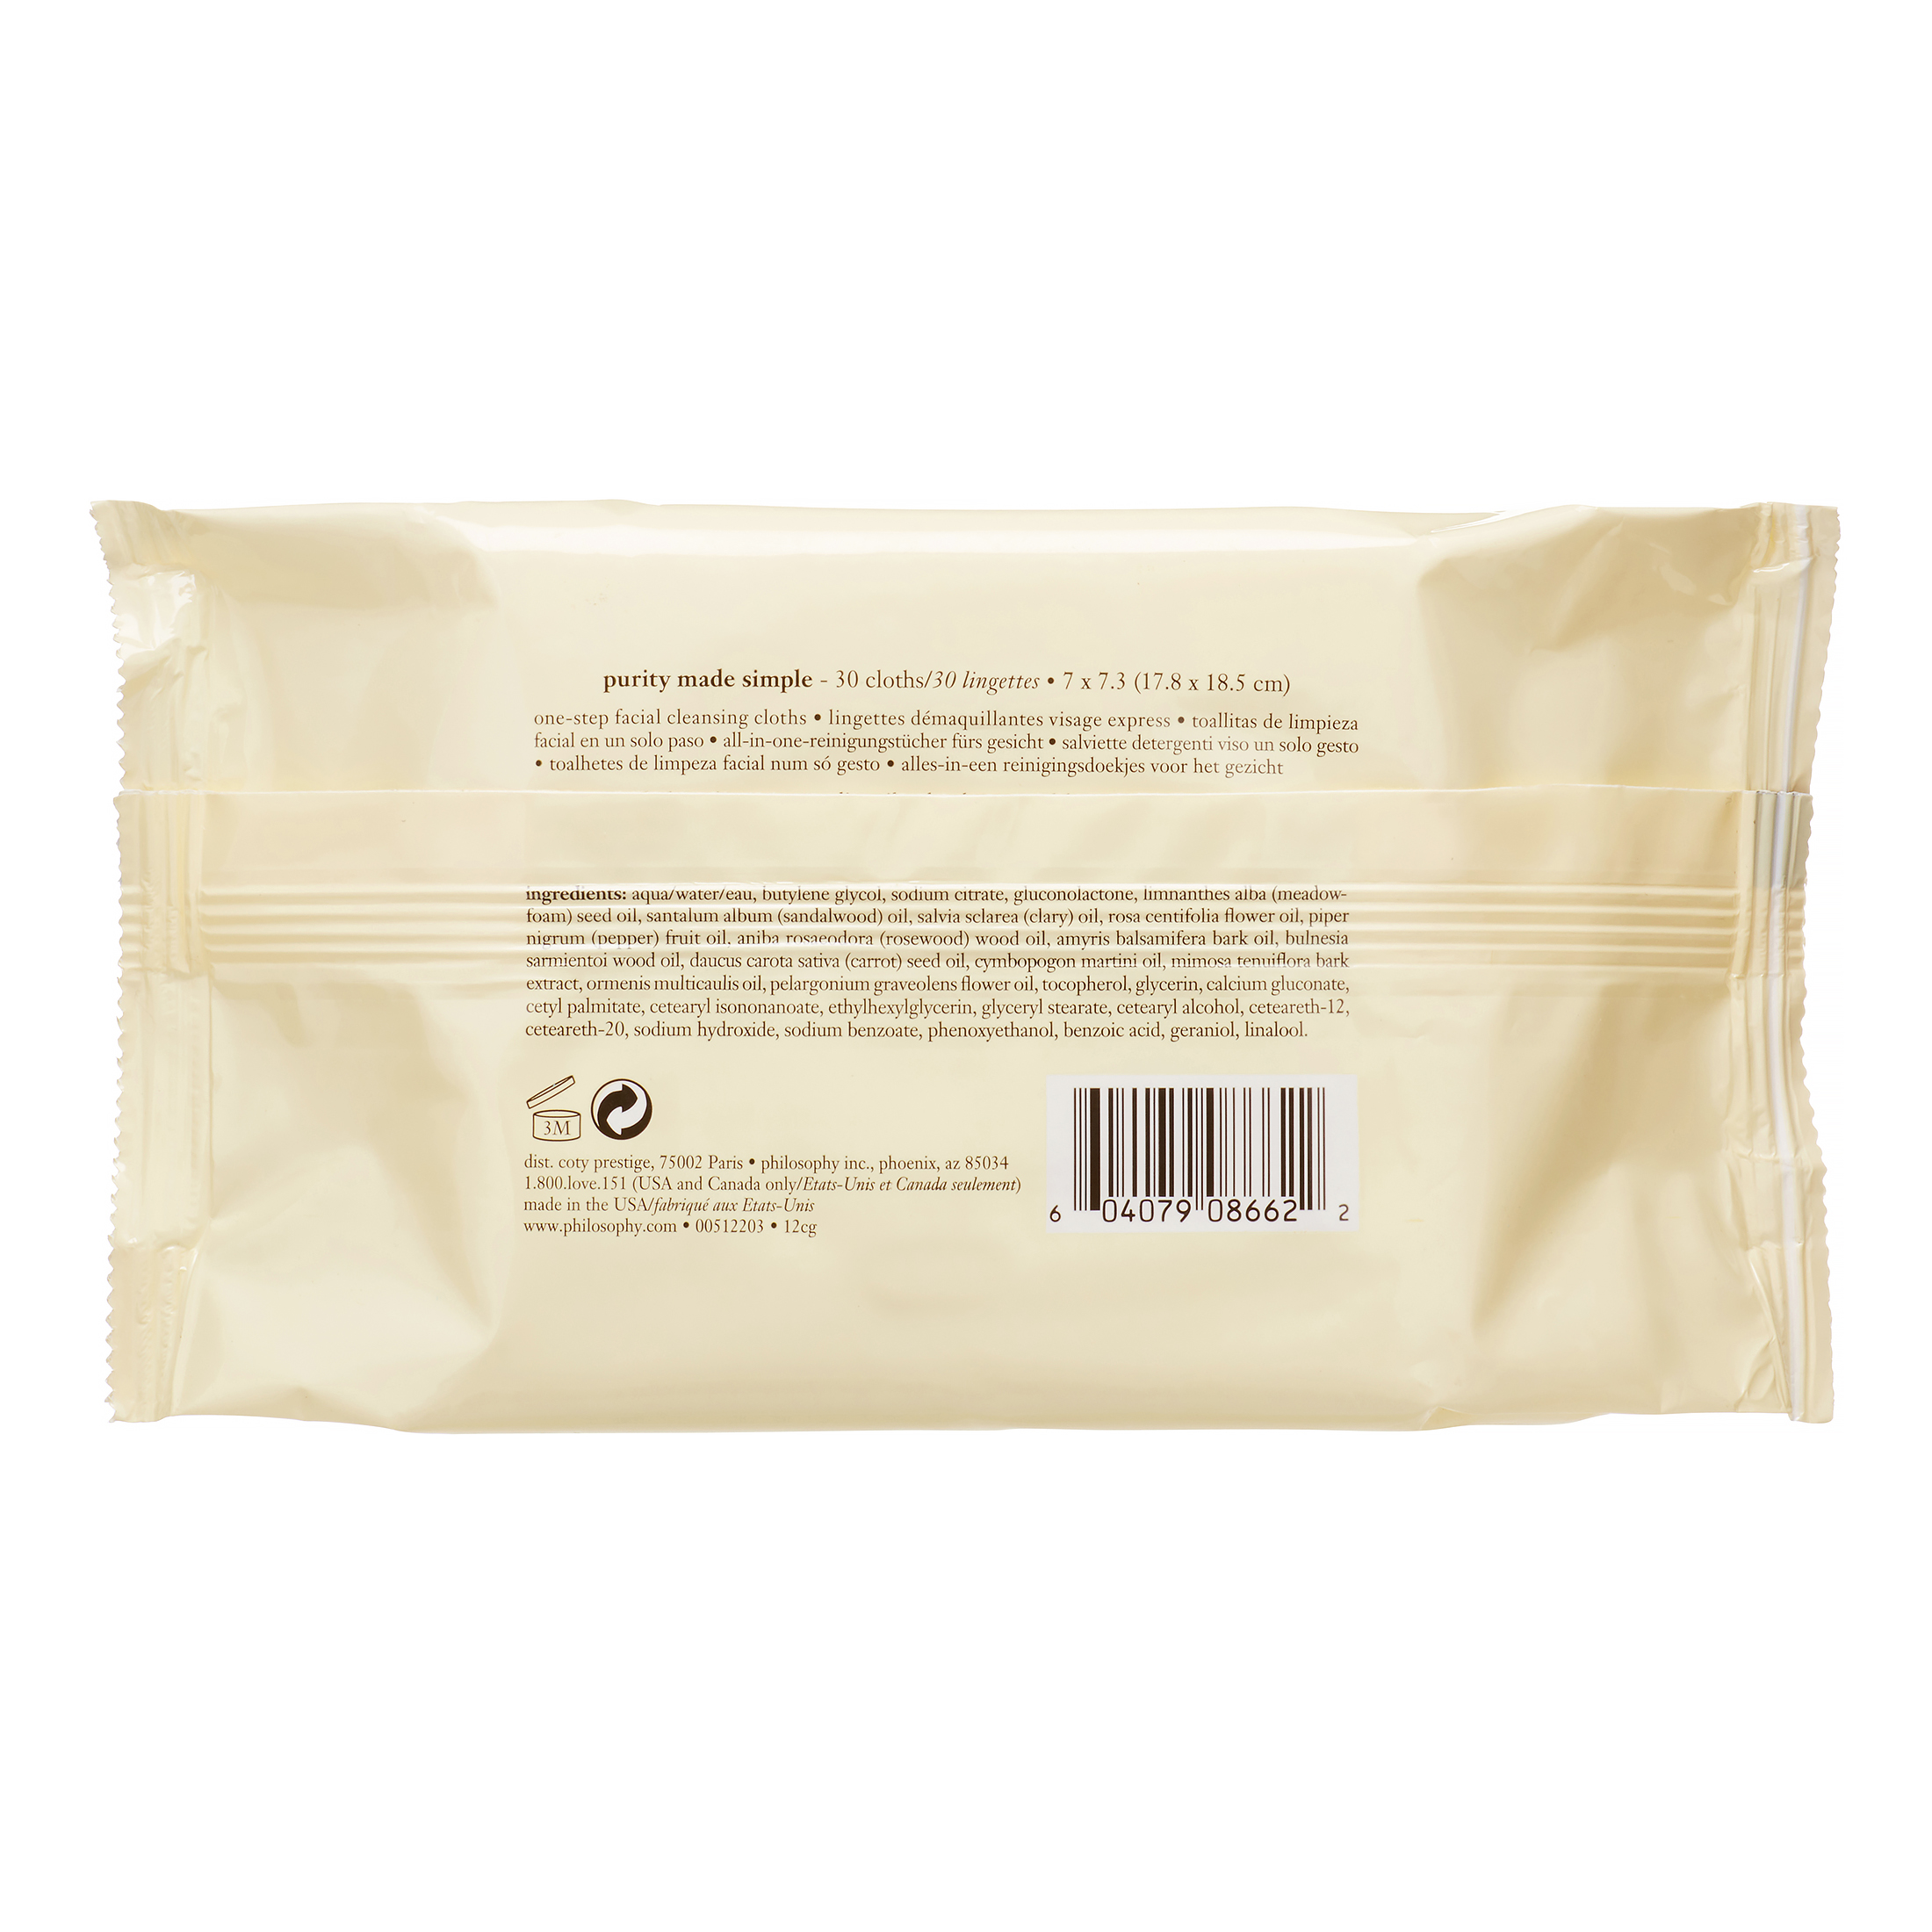 Philosophy Purity Made Simple One-Step Facial Cleansing Makeup Remover Wipes, 30 Count - image 3 of 4